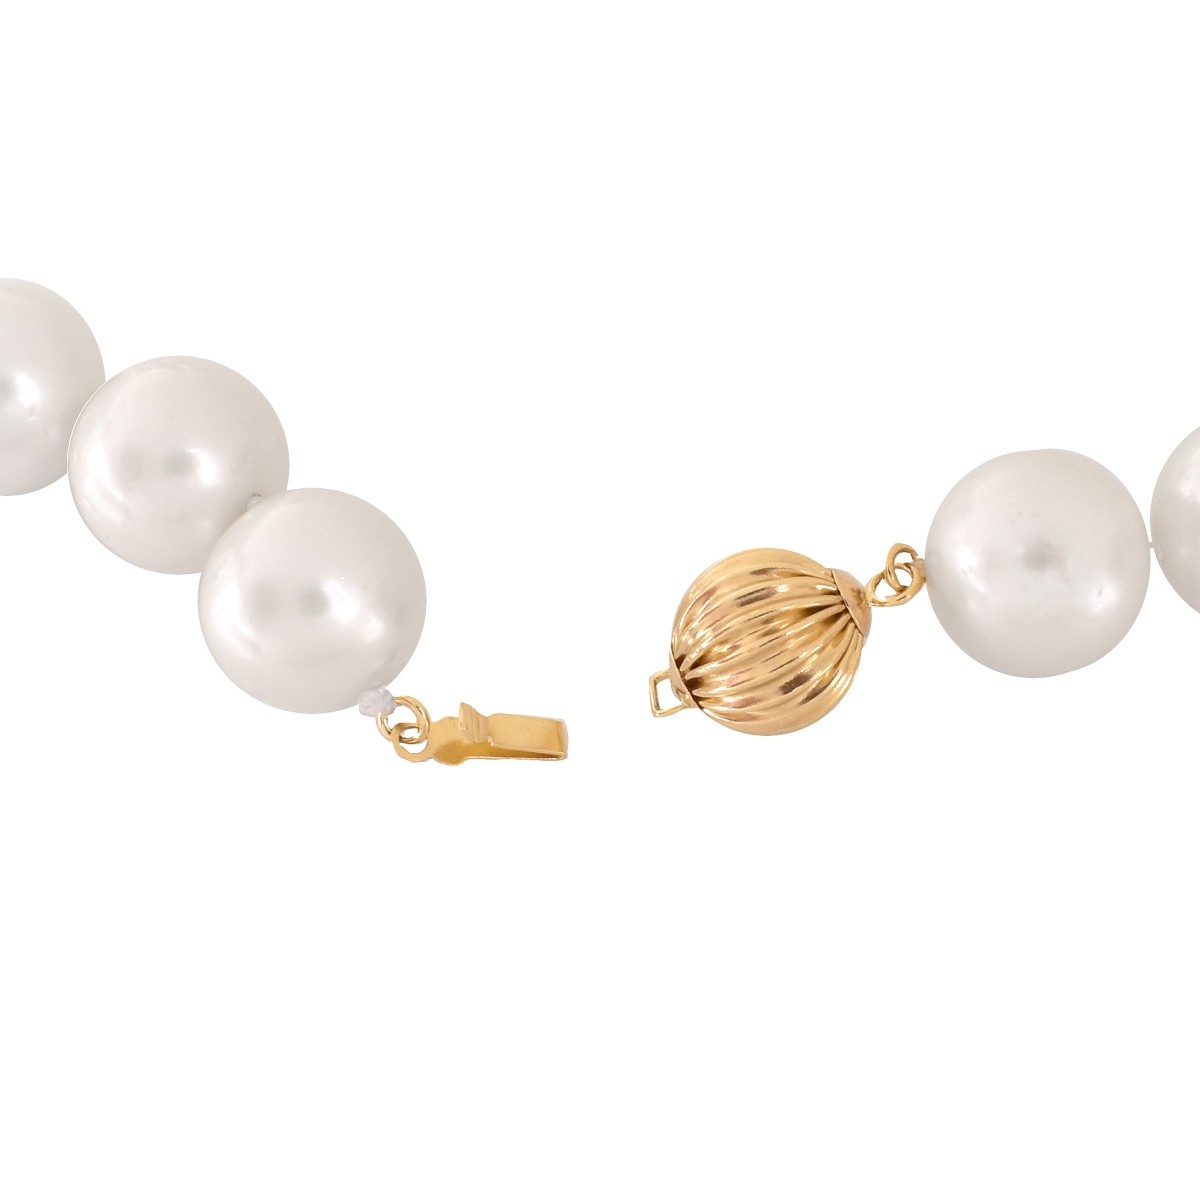 12.0-15.0 South Sea Pearl Necklace